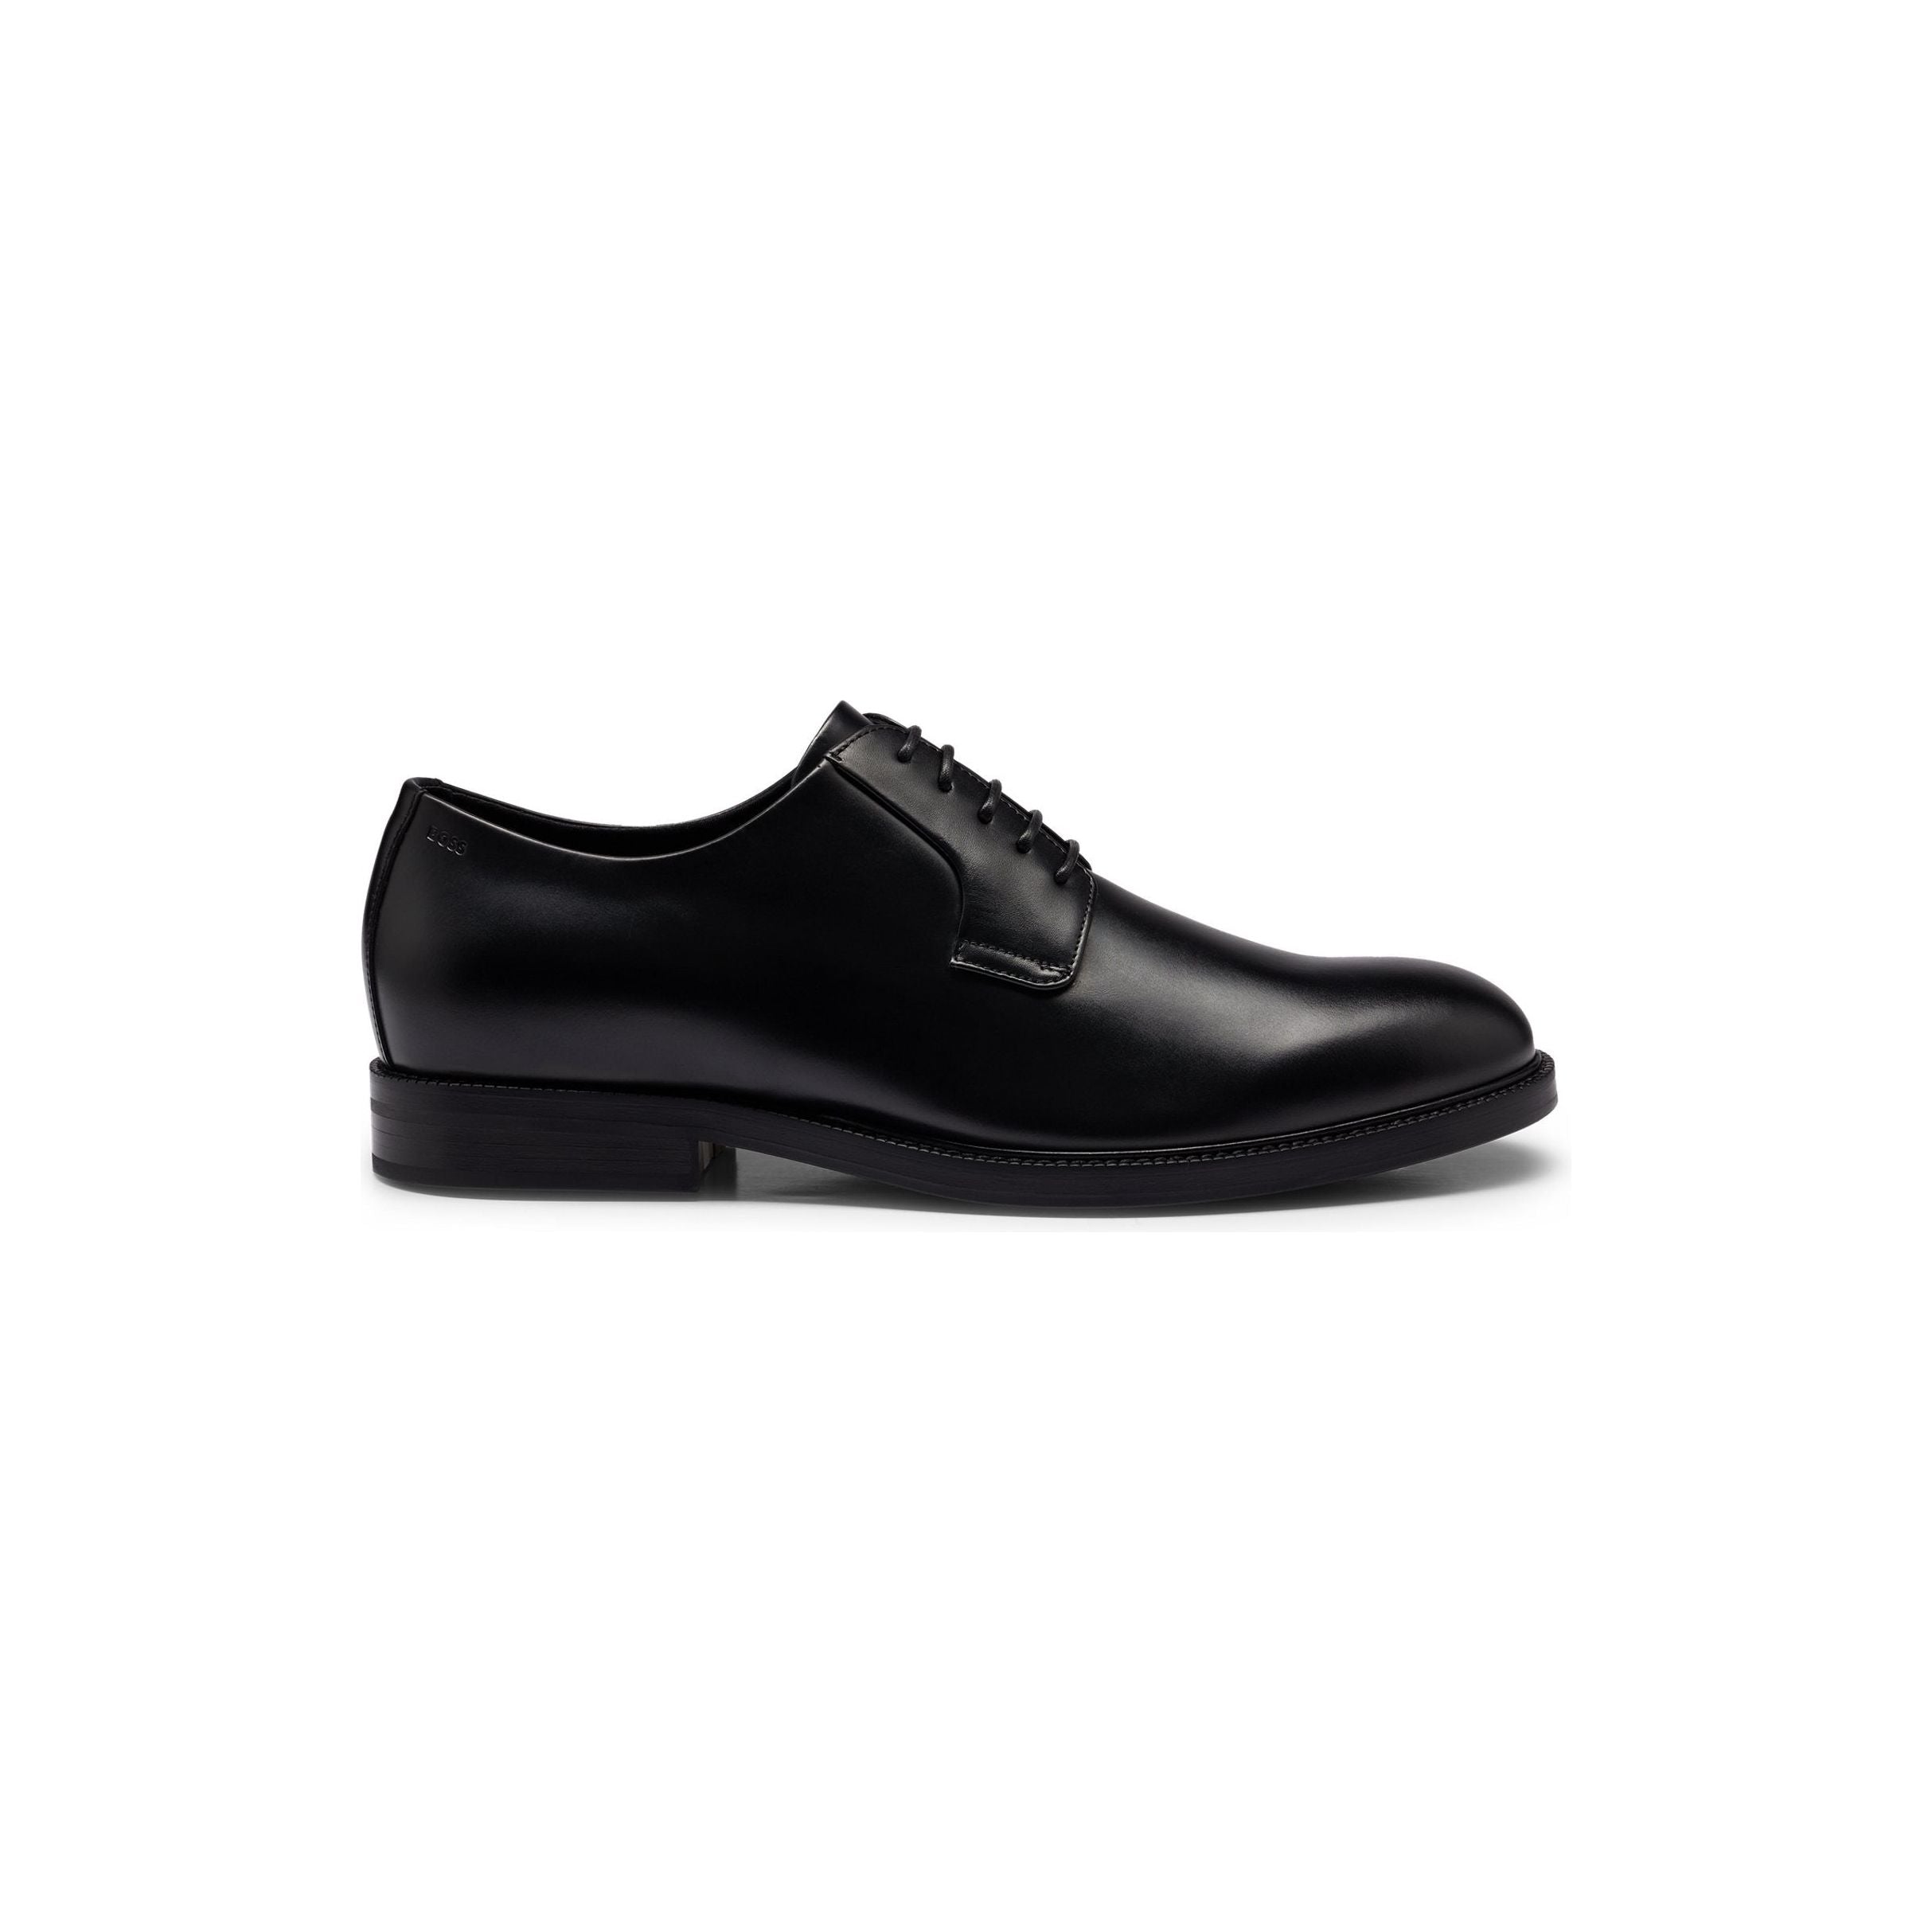 Udine leather Derby shoes